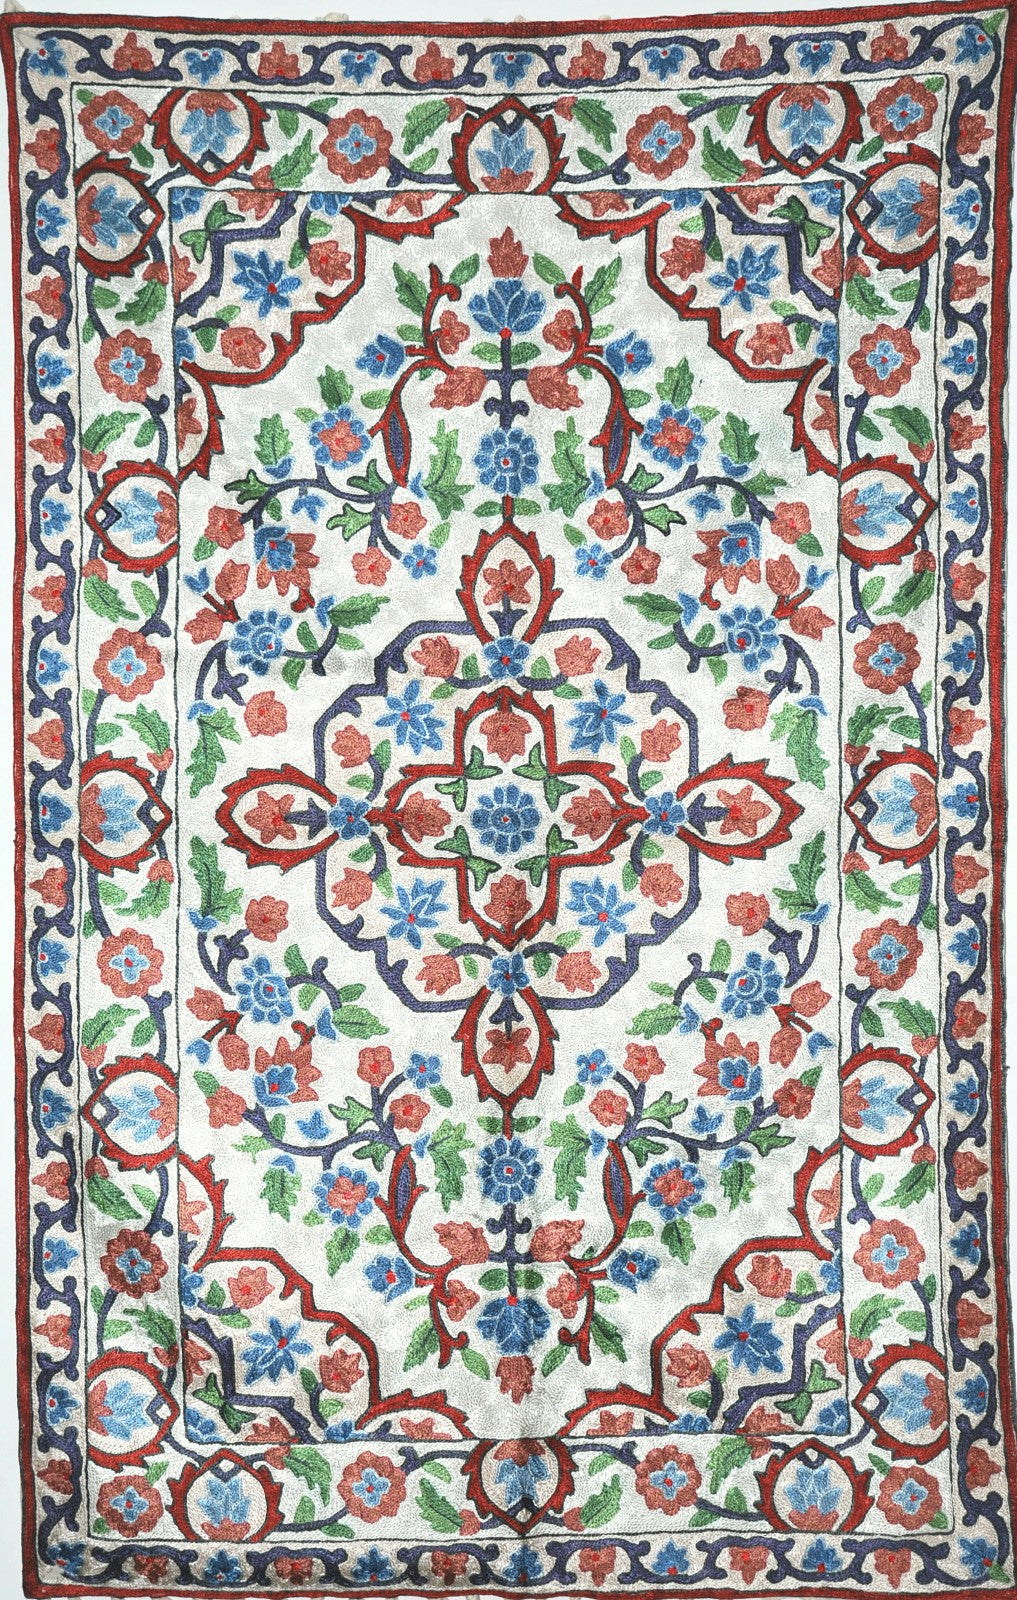 ChainStitch Tapestry Silk Area Rug, Multicolor Embroidery 2.5x4 feet #CWR10113